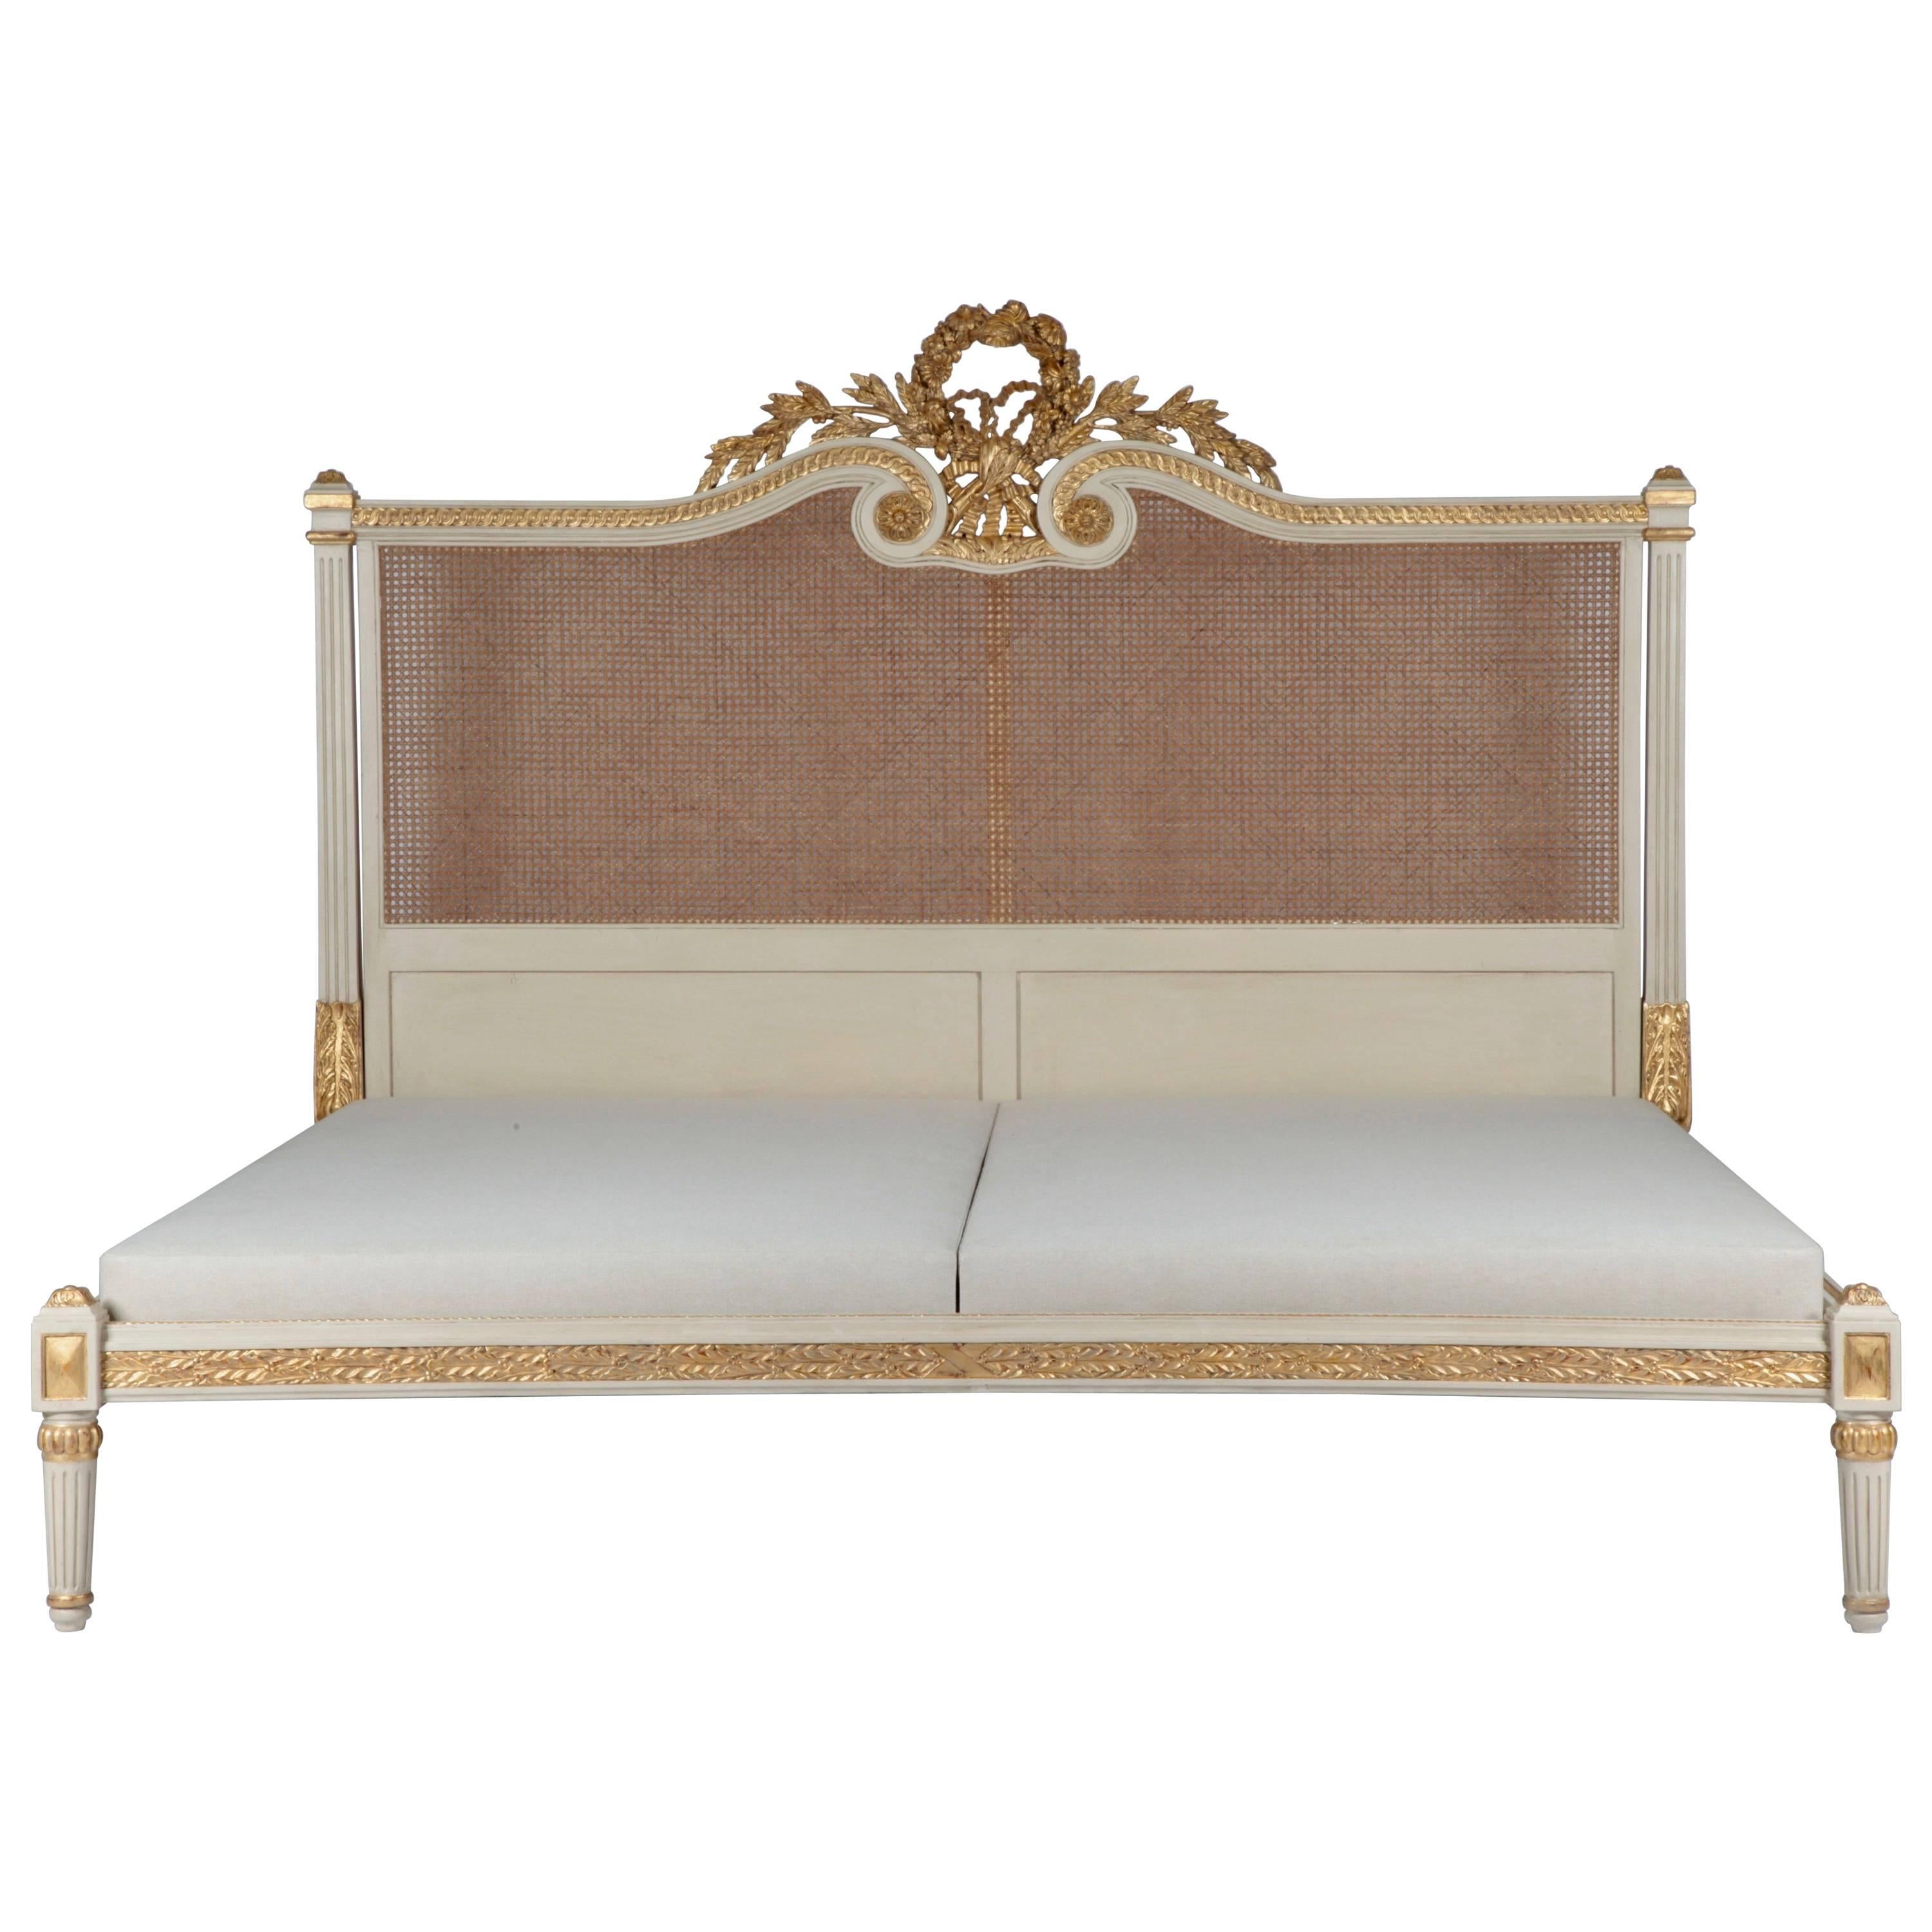 Rosace Bed, Louis XVI Style made by La Maison London, US King size mattress Size For Sale